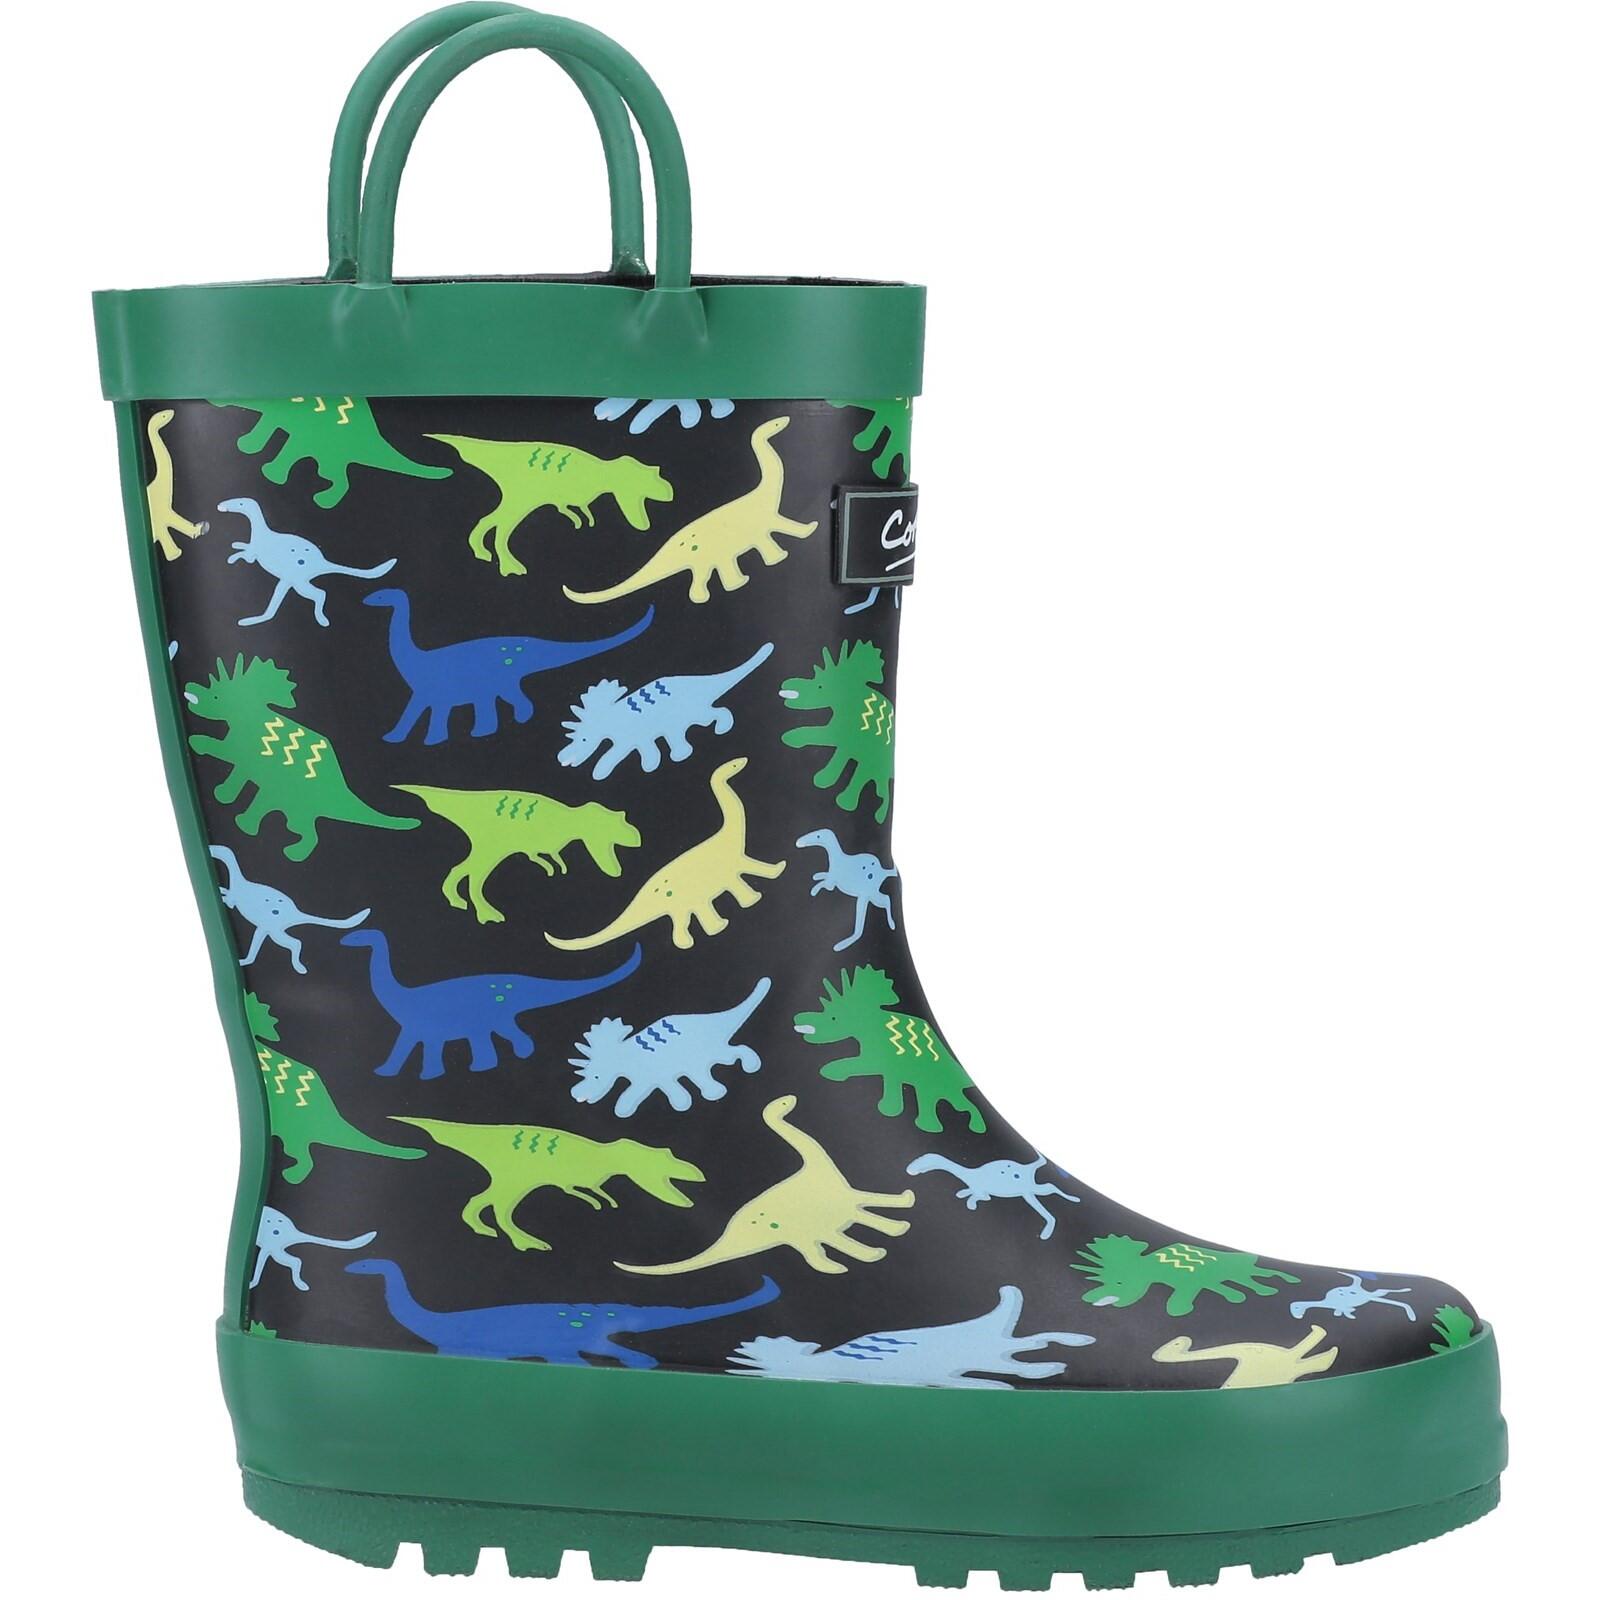 COTSWOLD Sprinkle Childrens Wellingtons GREEN